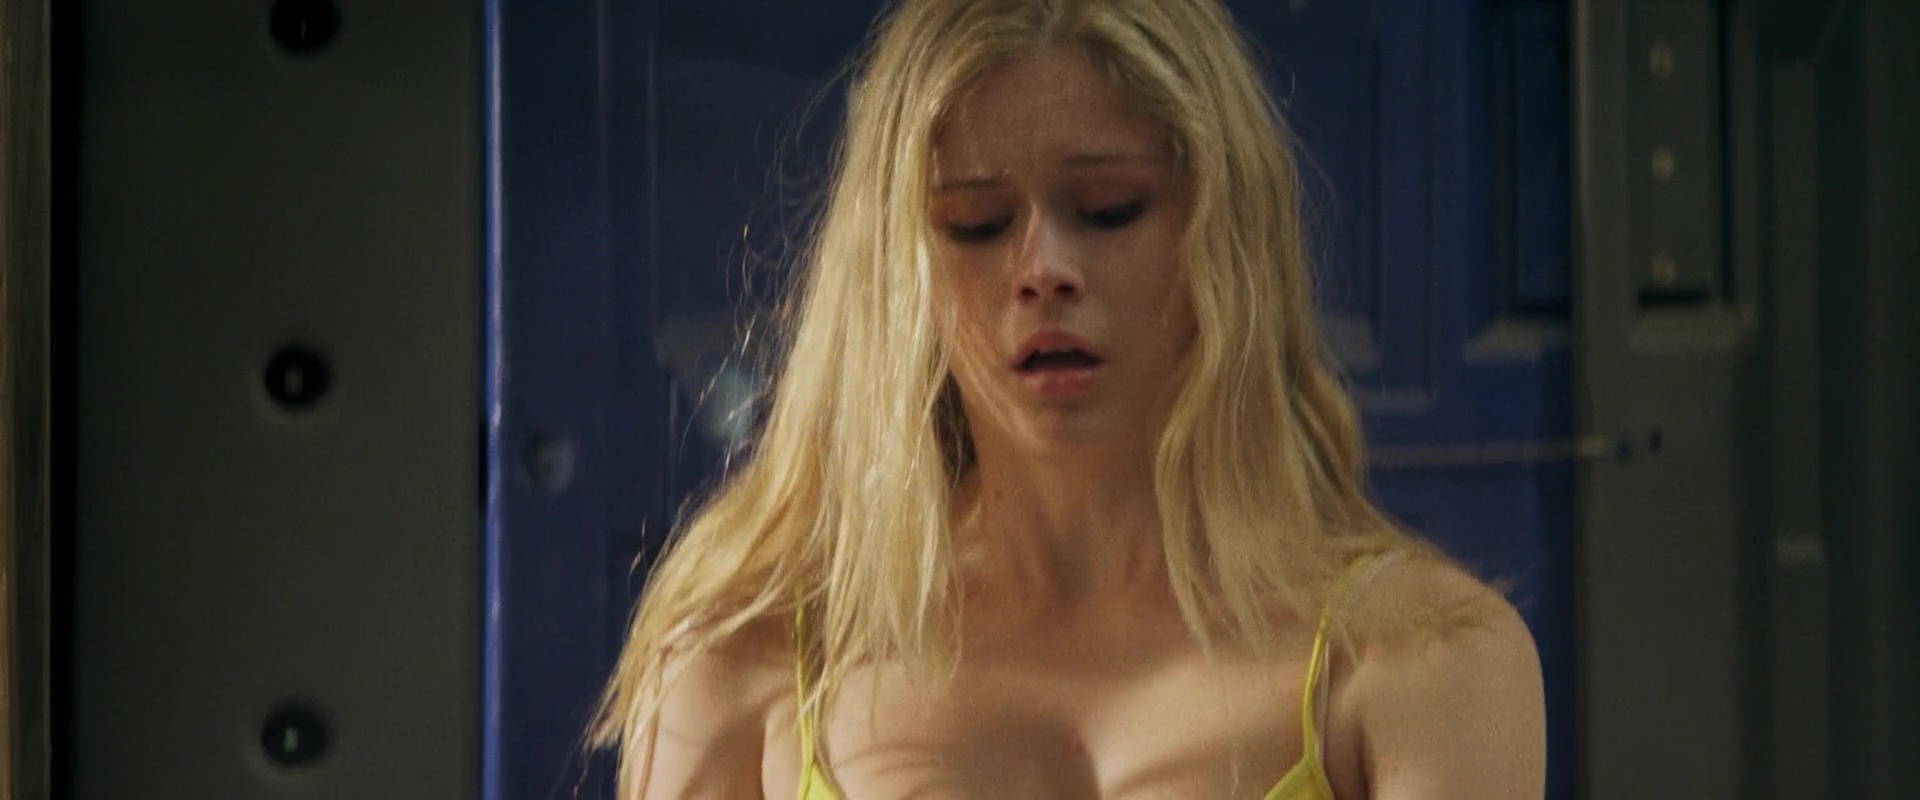 Erin moriarty topless